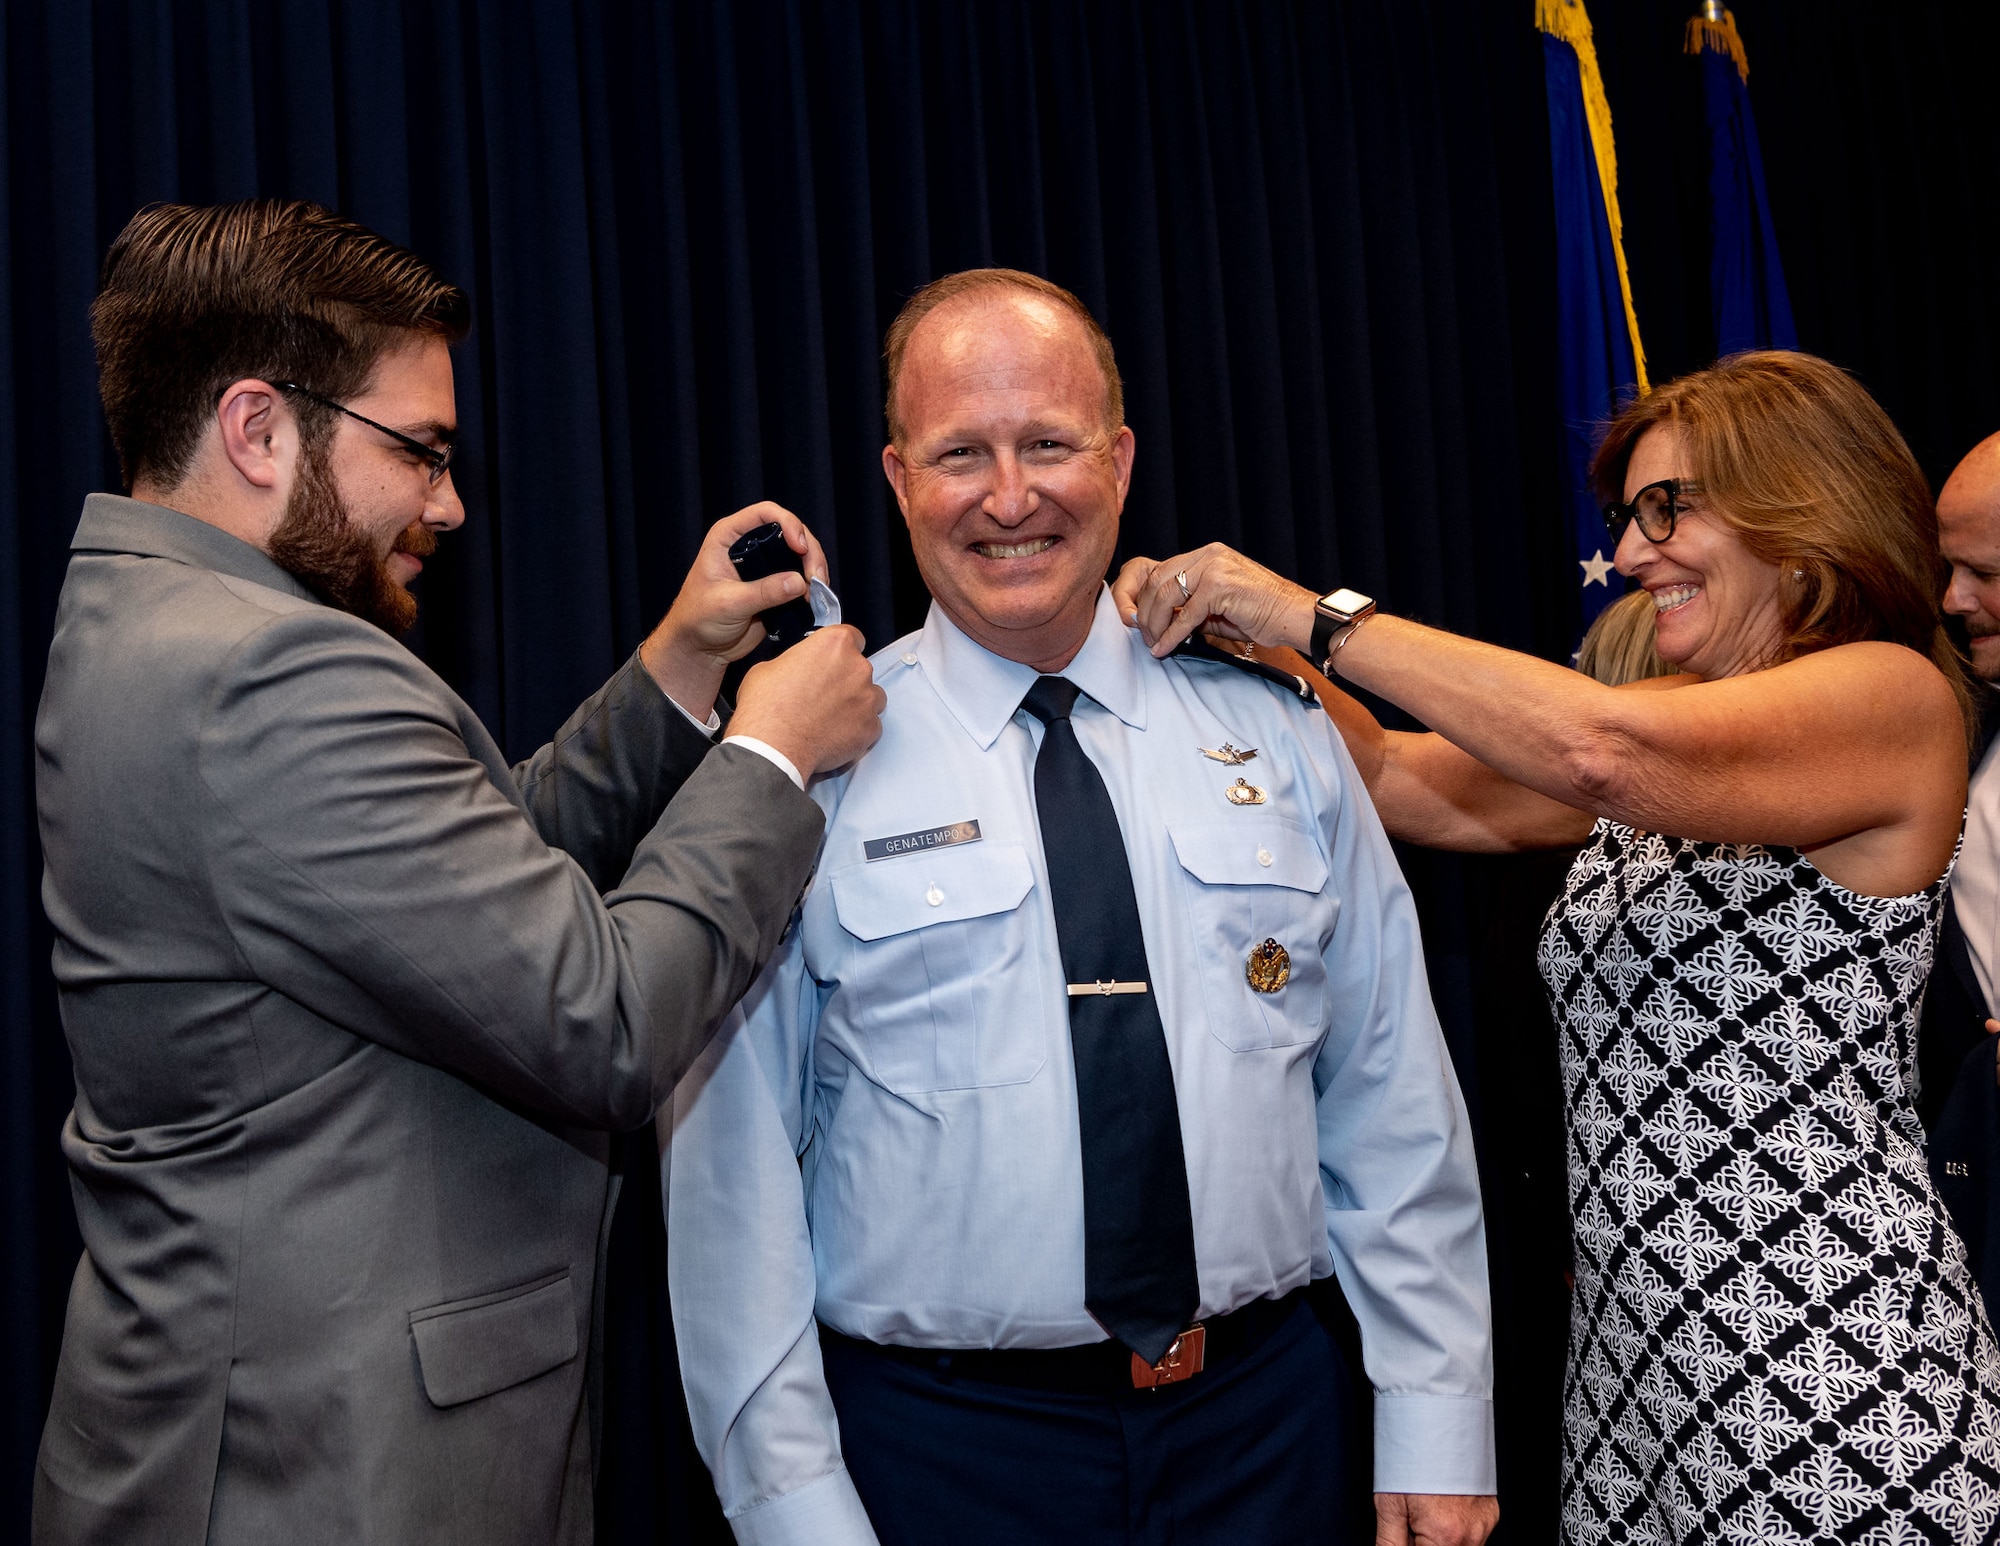 Maj. Gen. Anthony W. Genatempo, Air Force Nuclear Weapons Center commander and Air Force program executive officer for strategic systems, is pinned with the rank of Major General by his son, Rett Genatempo, and cousin, Celeste Mariani, during a promotion celebration at Kirtland Air Force Base, New Mexico, on July 9, 2021. His official promotion date was May 7, but the celebration was delayed to allow family and friends to attend after pandemic restrictions were eased. (U.S. Air Force photo by Allen Winston)